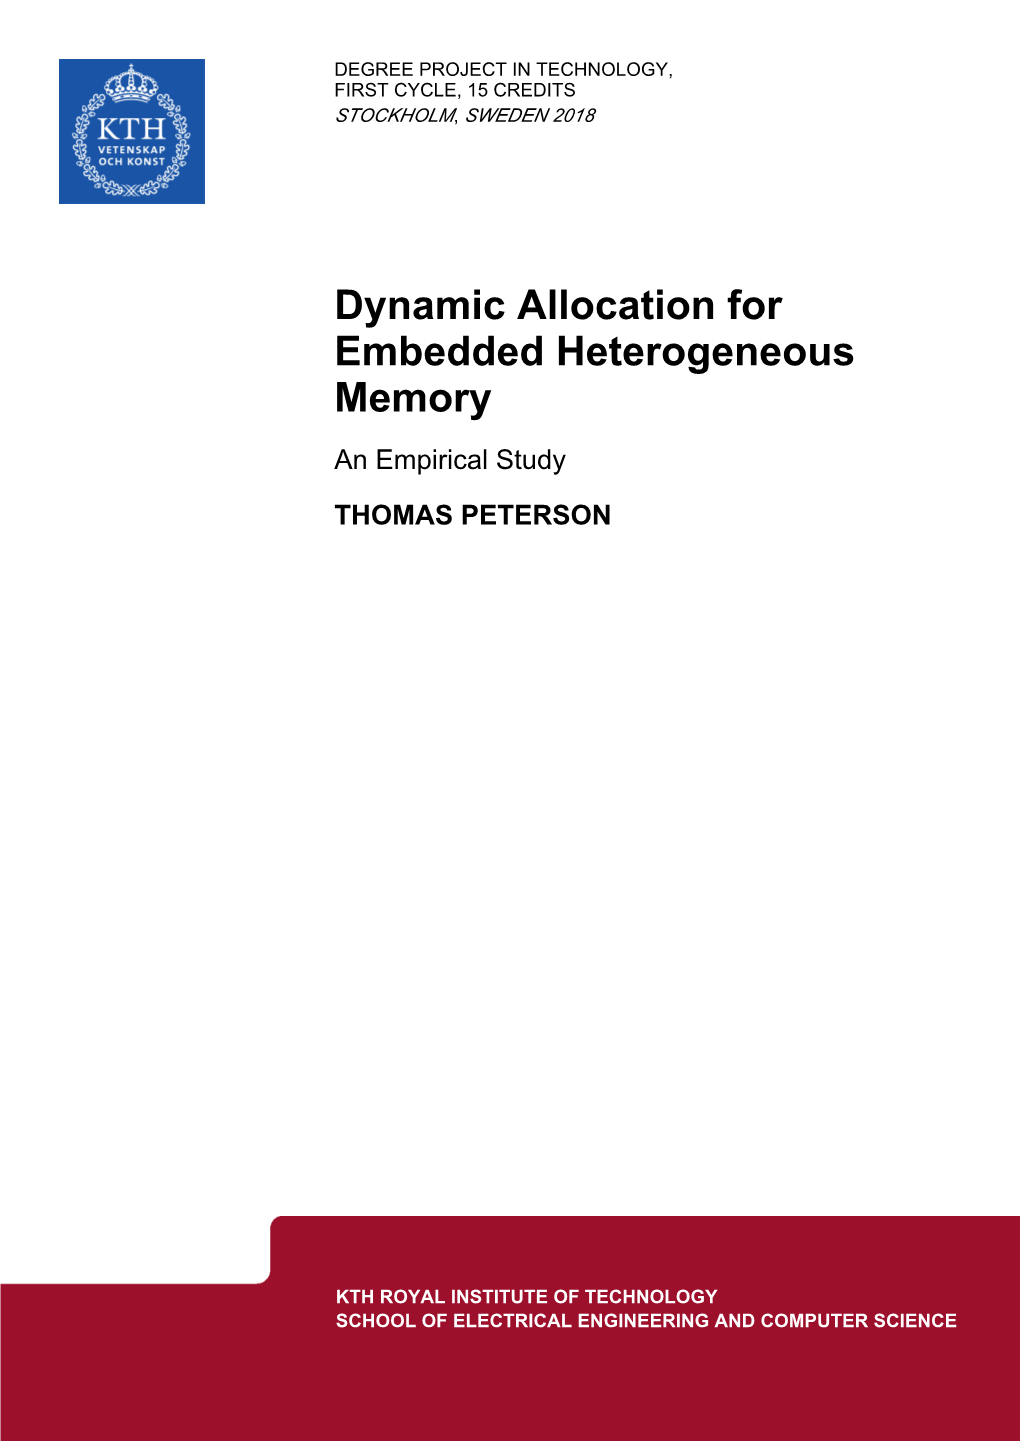 Dynamic Allocation for Embedded Heterogeneous Memory an Empirical Study